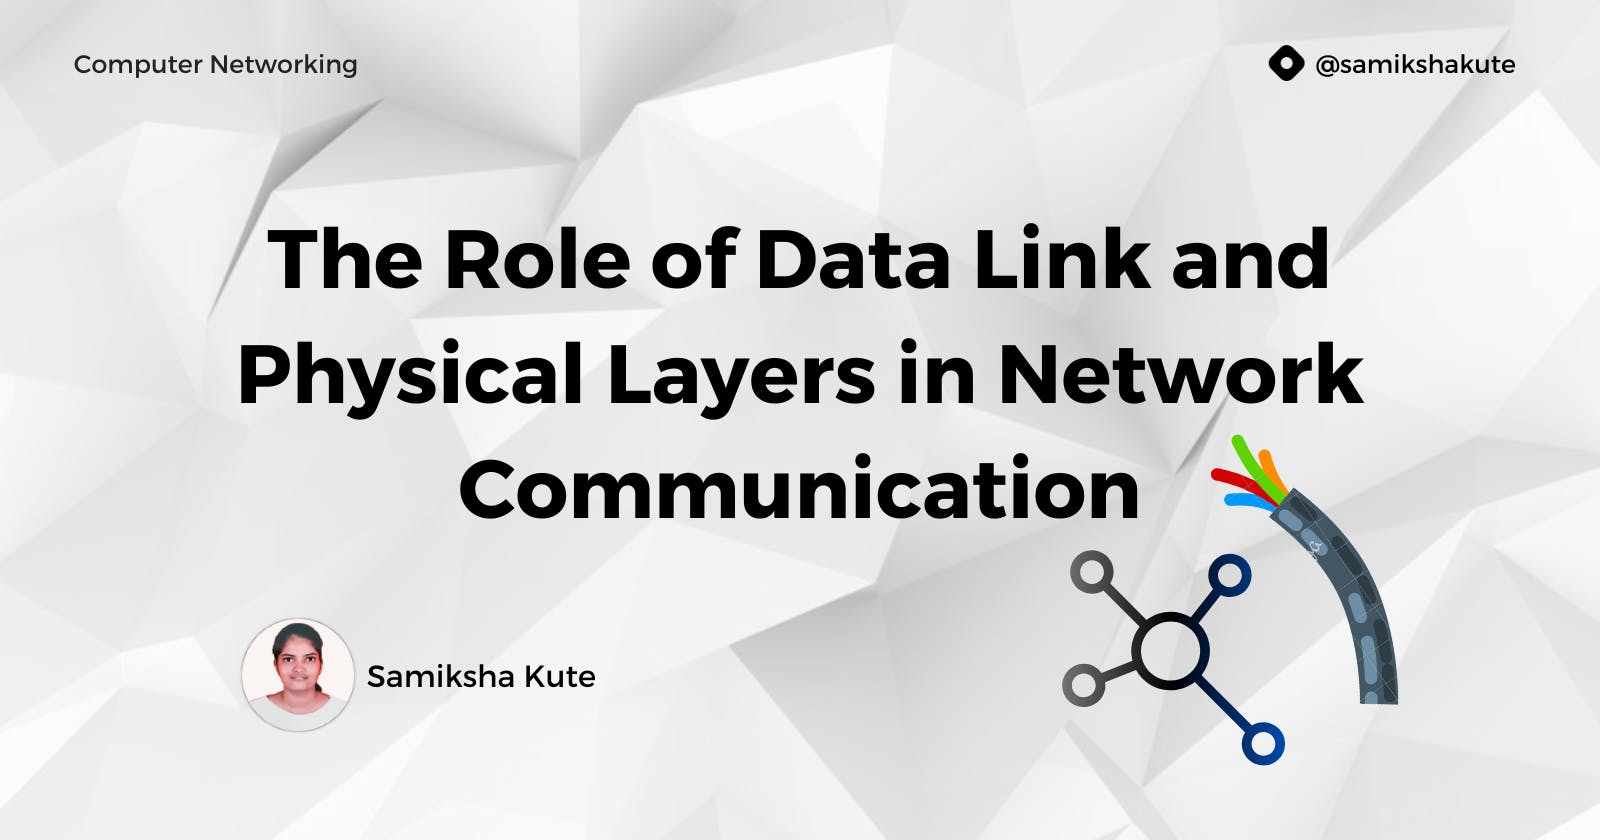 The Role of Data Link and Physical Layers in Network Communication